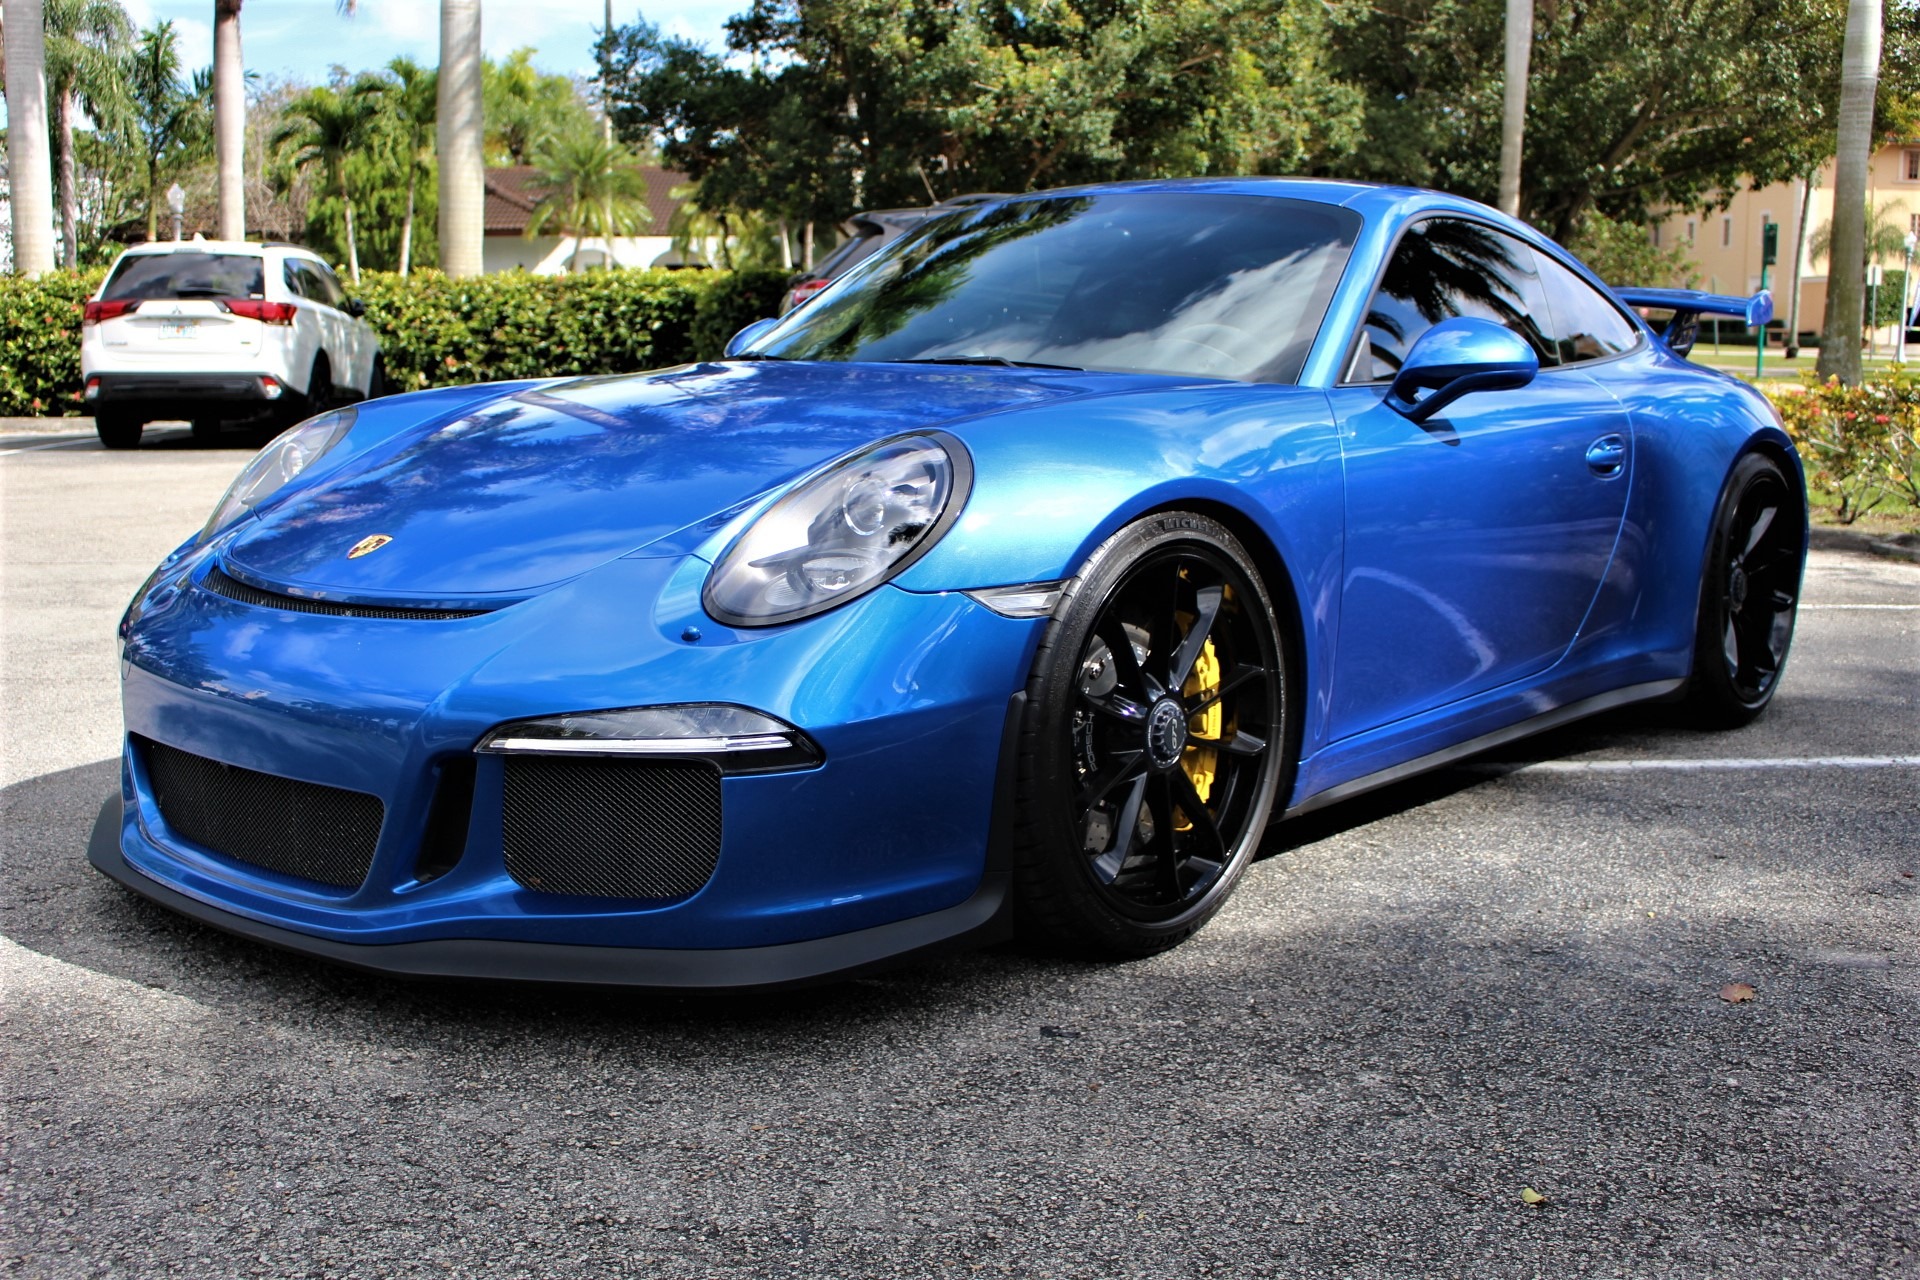 Used 2014 Porsche 911 GT3 for sale Sold at The Gables Sports Cars in Miami FL 33146 2